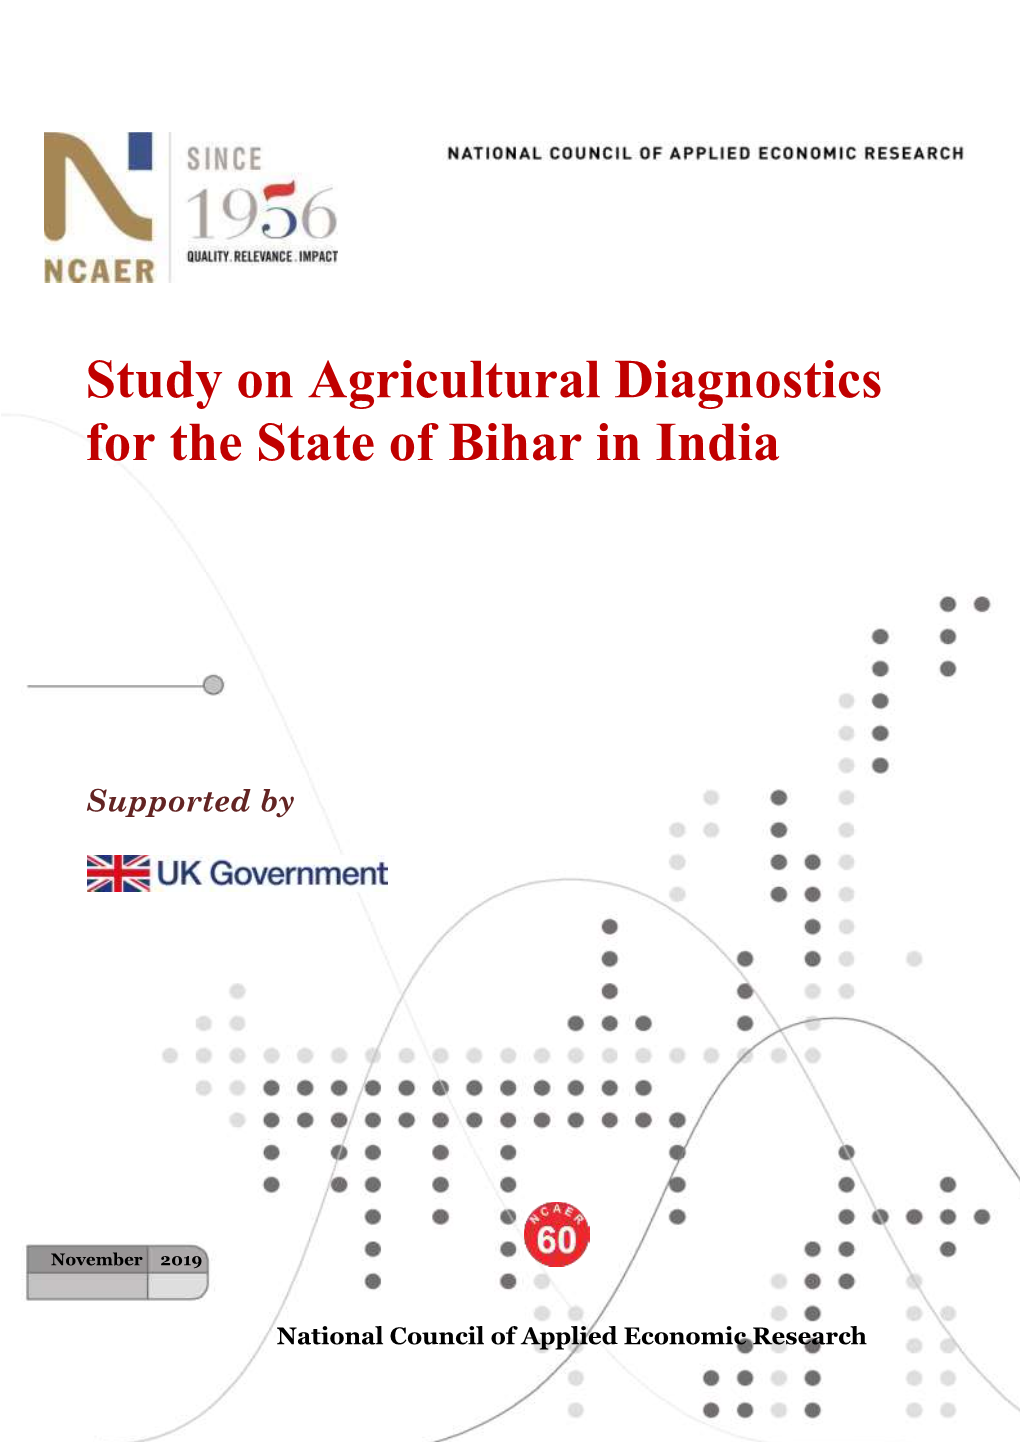 Study on Agricultural Diagnostics for the State of Bihar in India